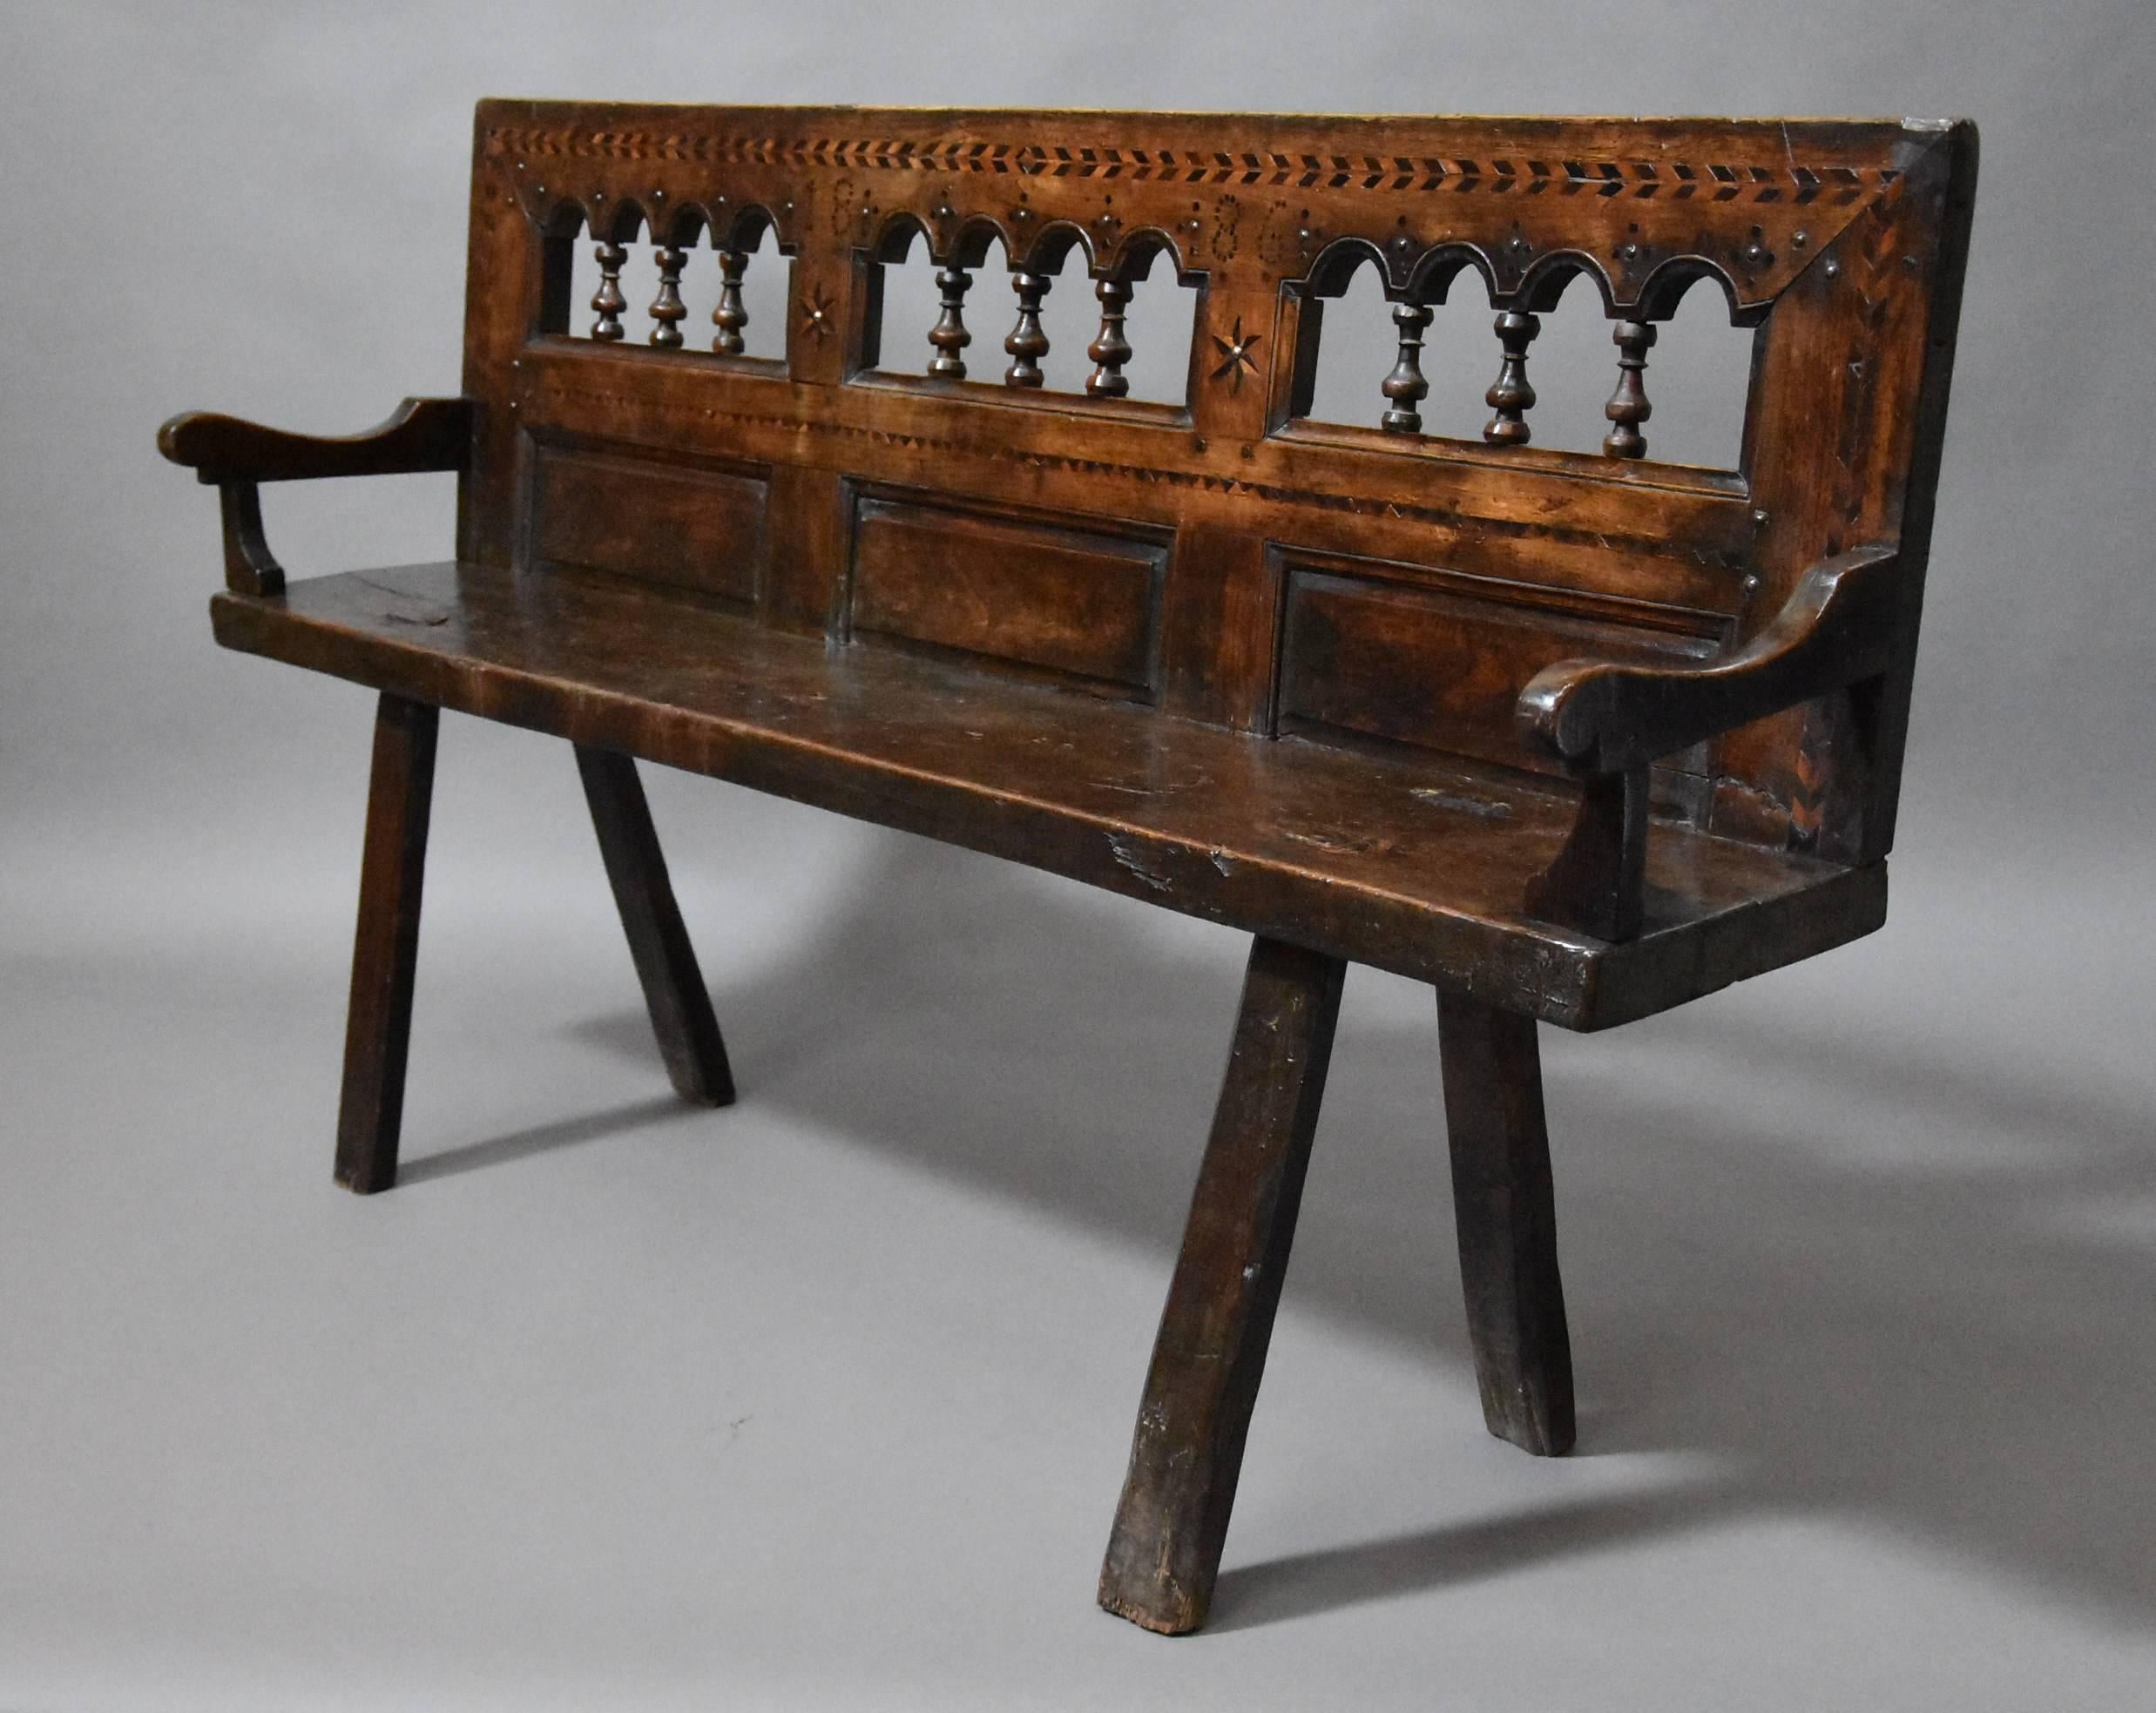 A late 19th century Breton walnut and elm bench of superb patina from Northern France.

This bench is typical of Breton style furniture due to the design on the back consisting of turnings and inlaid decoration often found on Breton beds and other